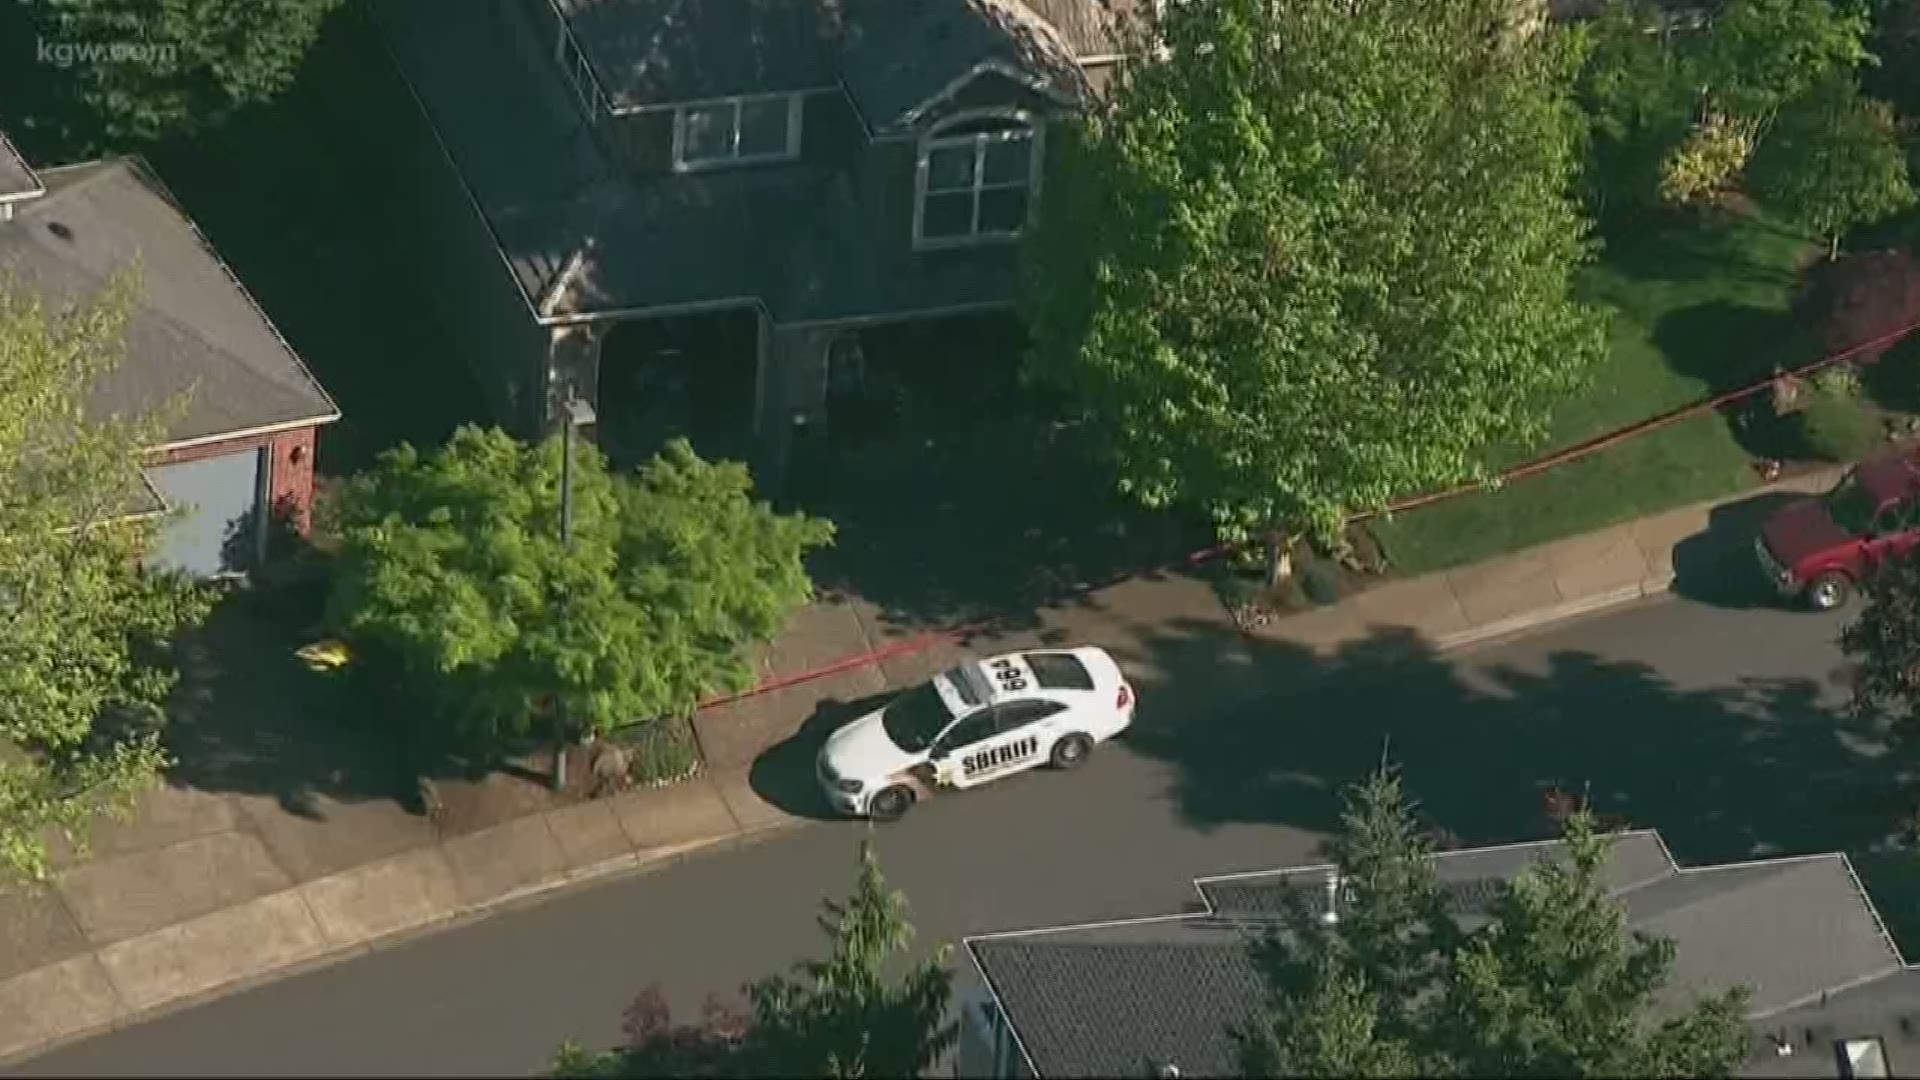 A 56-year-old man was wounded in a shooting in Beaverton's Sexton Mountain neighborhood Friday.